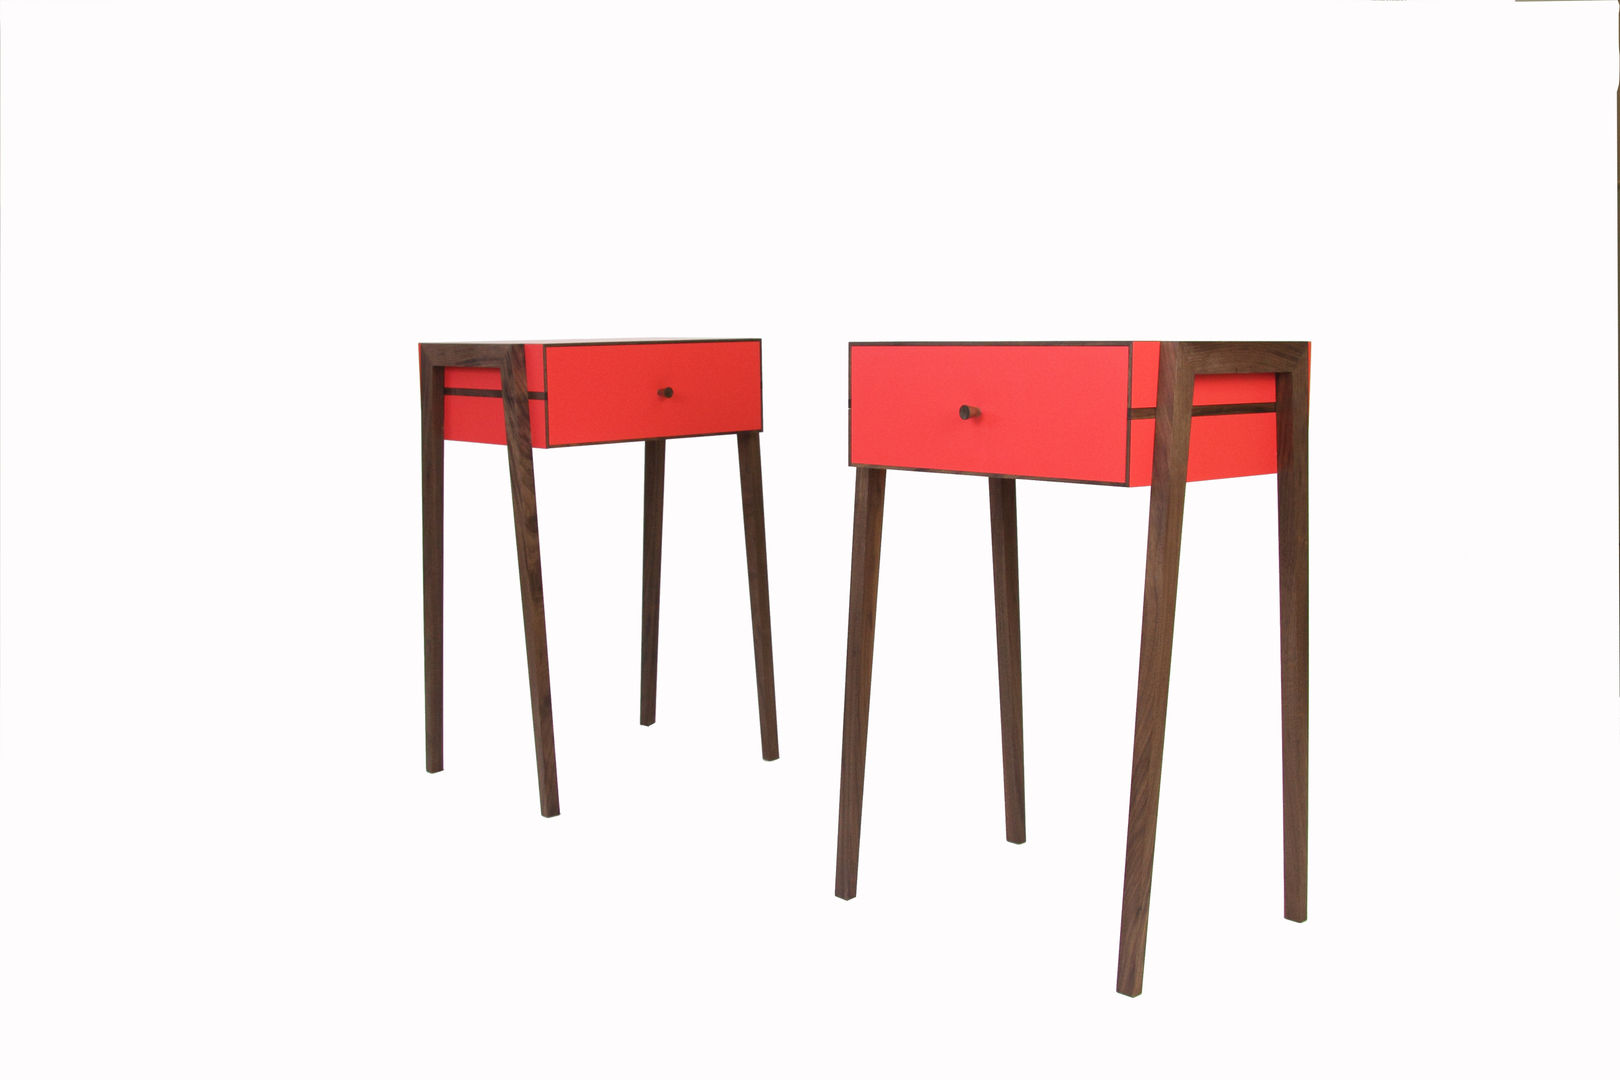 Animate Bedside Table in Red Formica and Walnut Young & Norgate 모던스타일 침실 베드 사이드 테이블